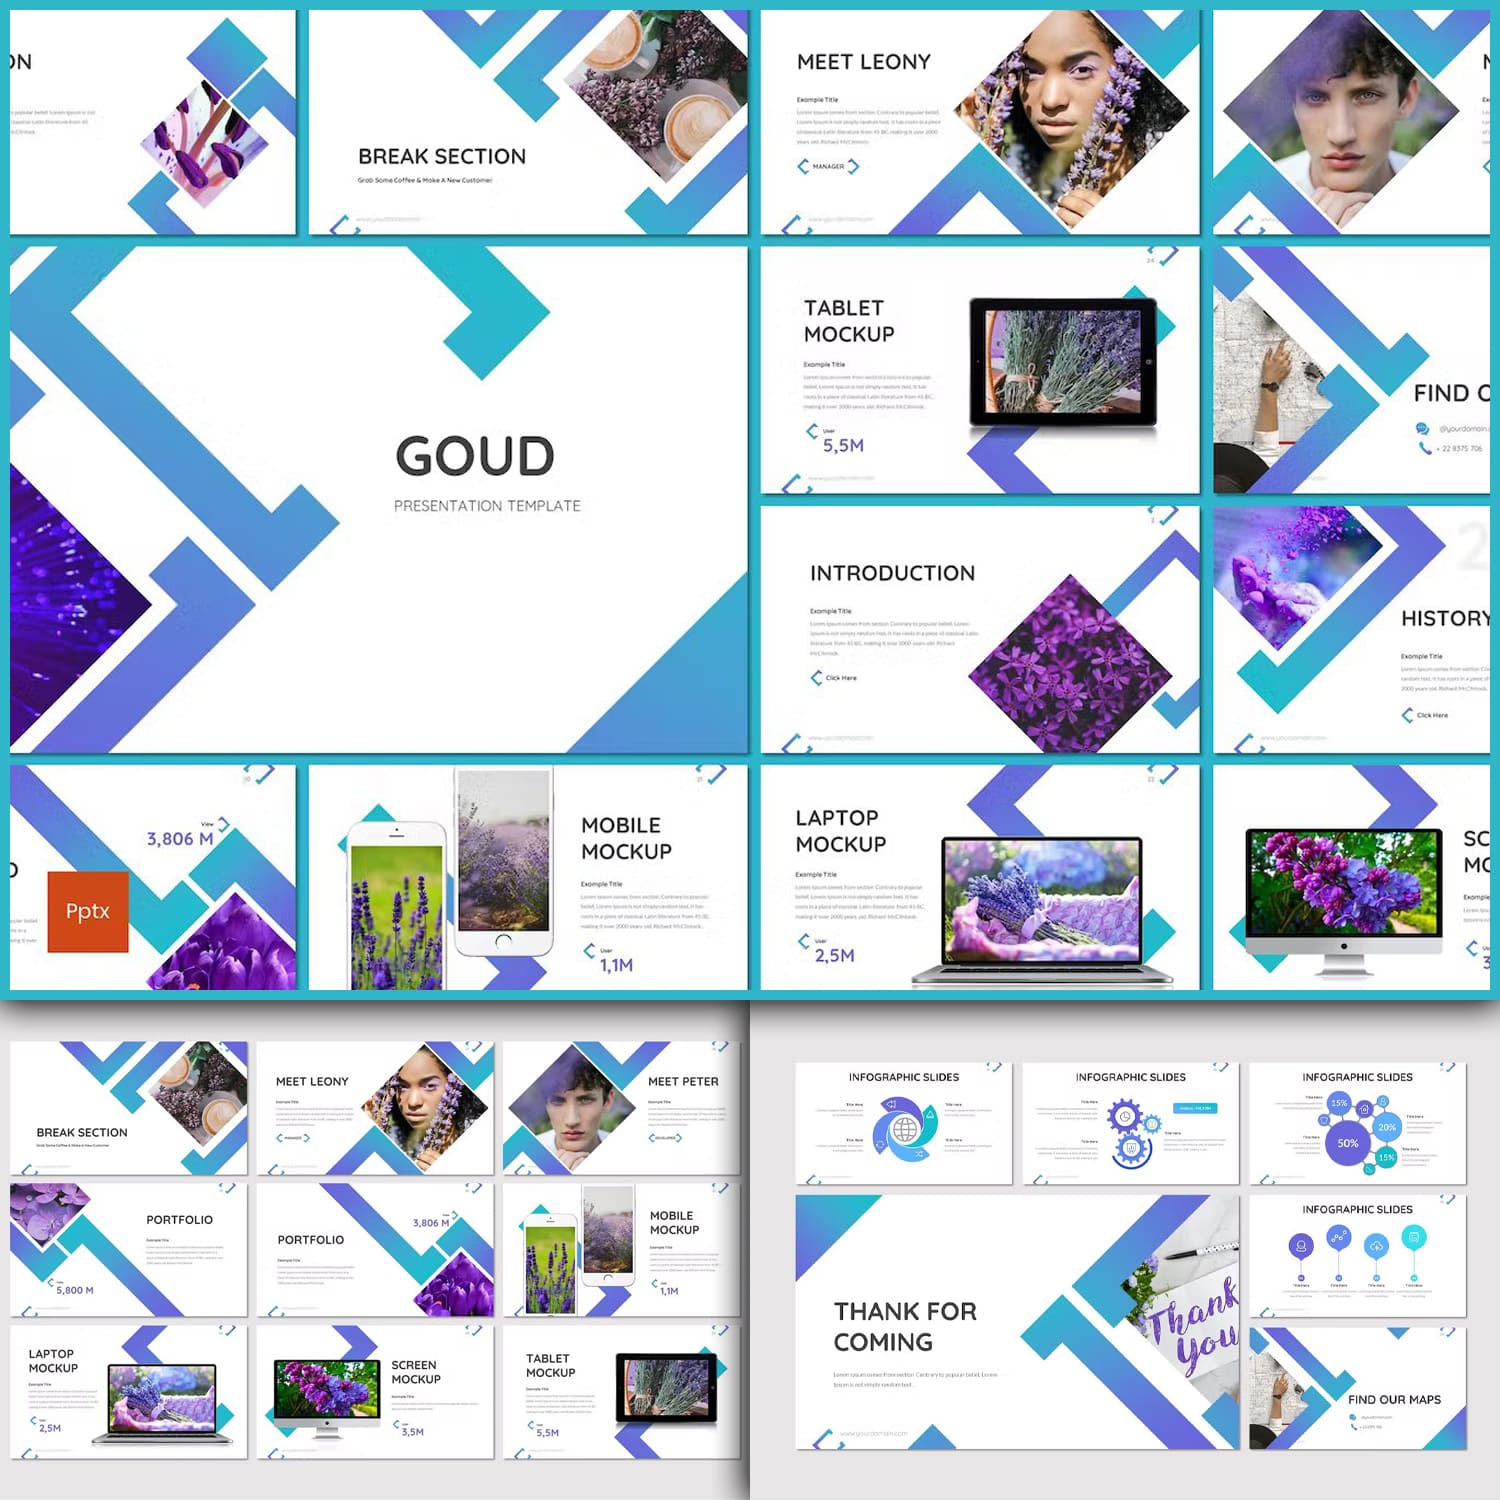 Goud Presentation Template - main image preview.